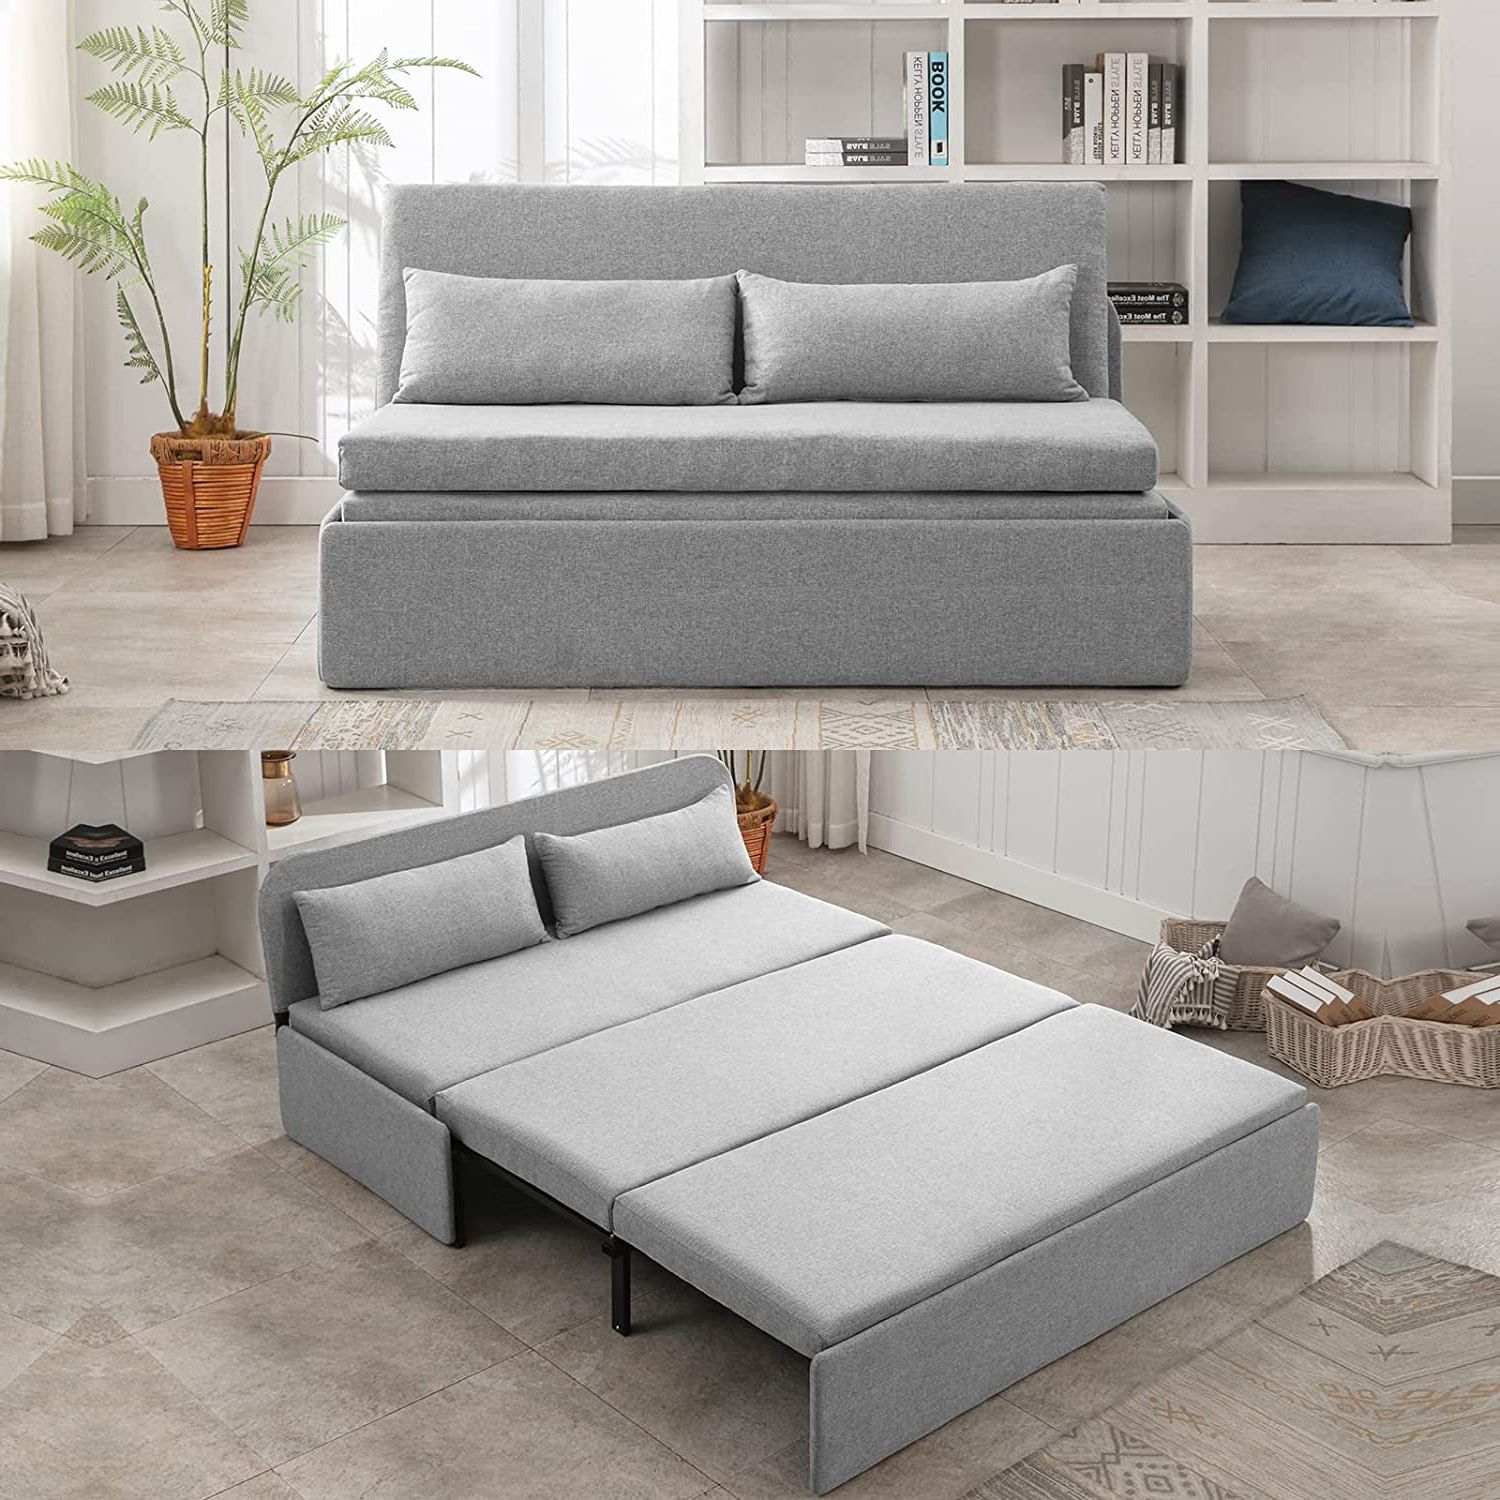 Mjkone Twin Size Convertible Sofa Bed, Modern Pull Out Linen Sleeper Sofa  Couch, Revesible Couch Bed With Cushions&throw Pillows For Small  Place/apartment/living Room/office/studio(light Gray) – Walmart Intended For Pull Out Couch Beds (Gallery 6 of 20)